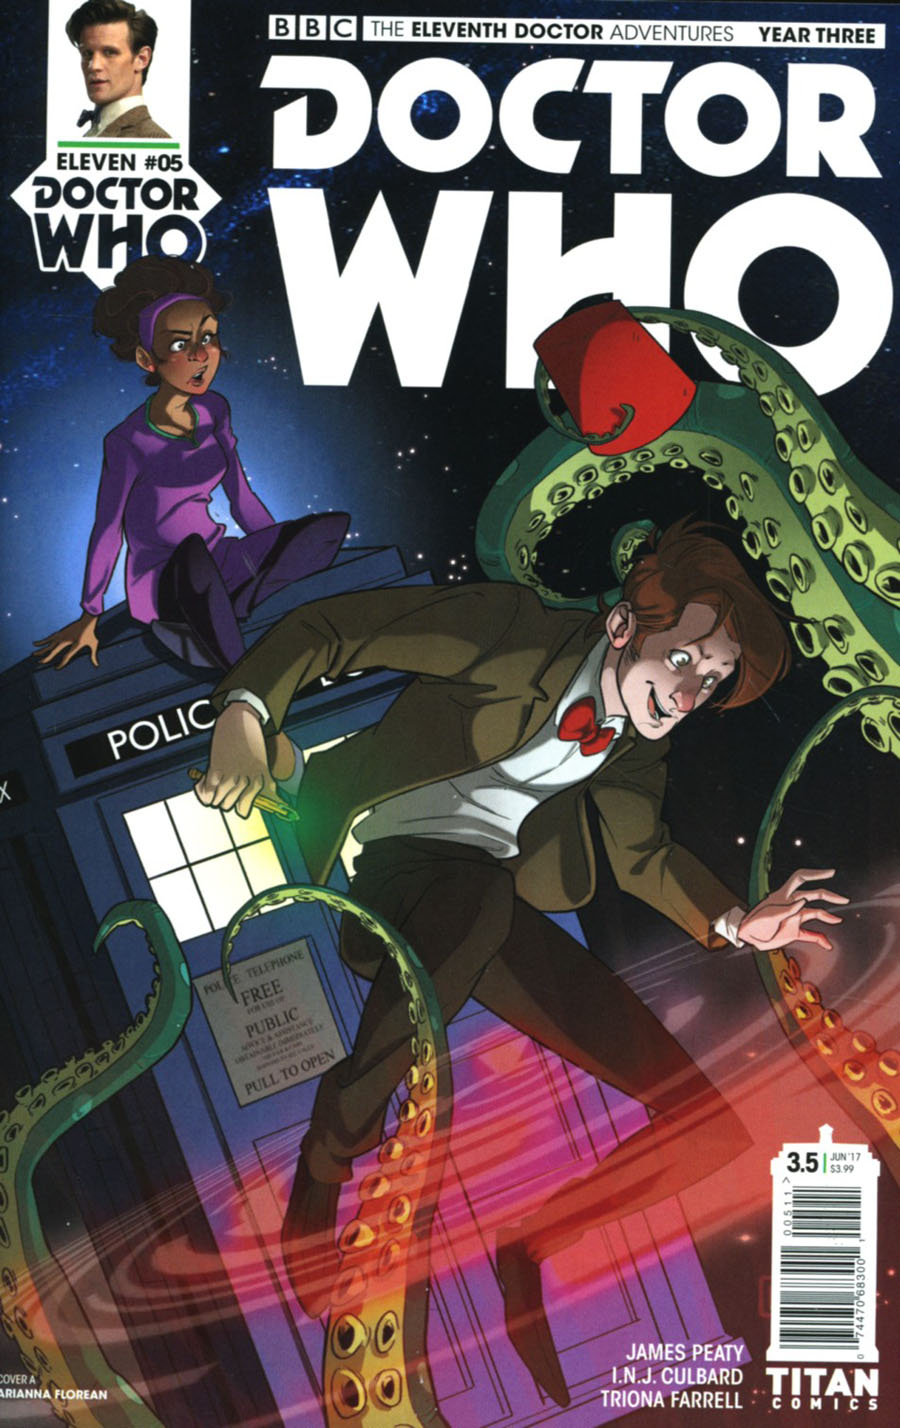 Doctor Who 11th Doctor Year Three #5 Cover A Regular Arianna Florean Cover